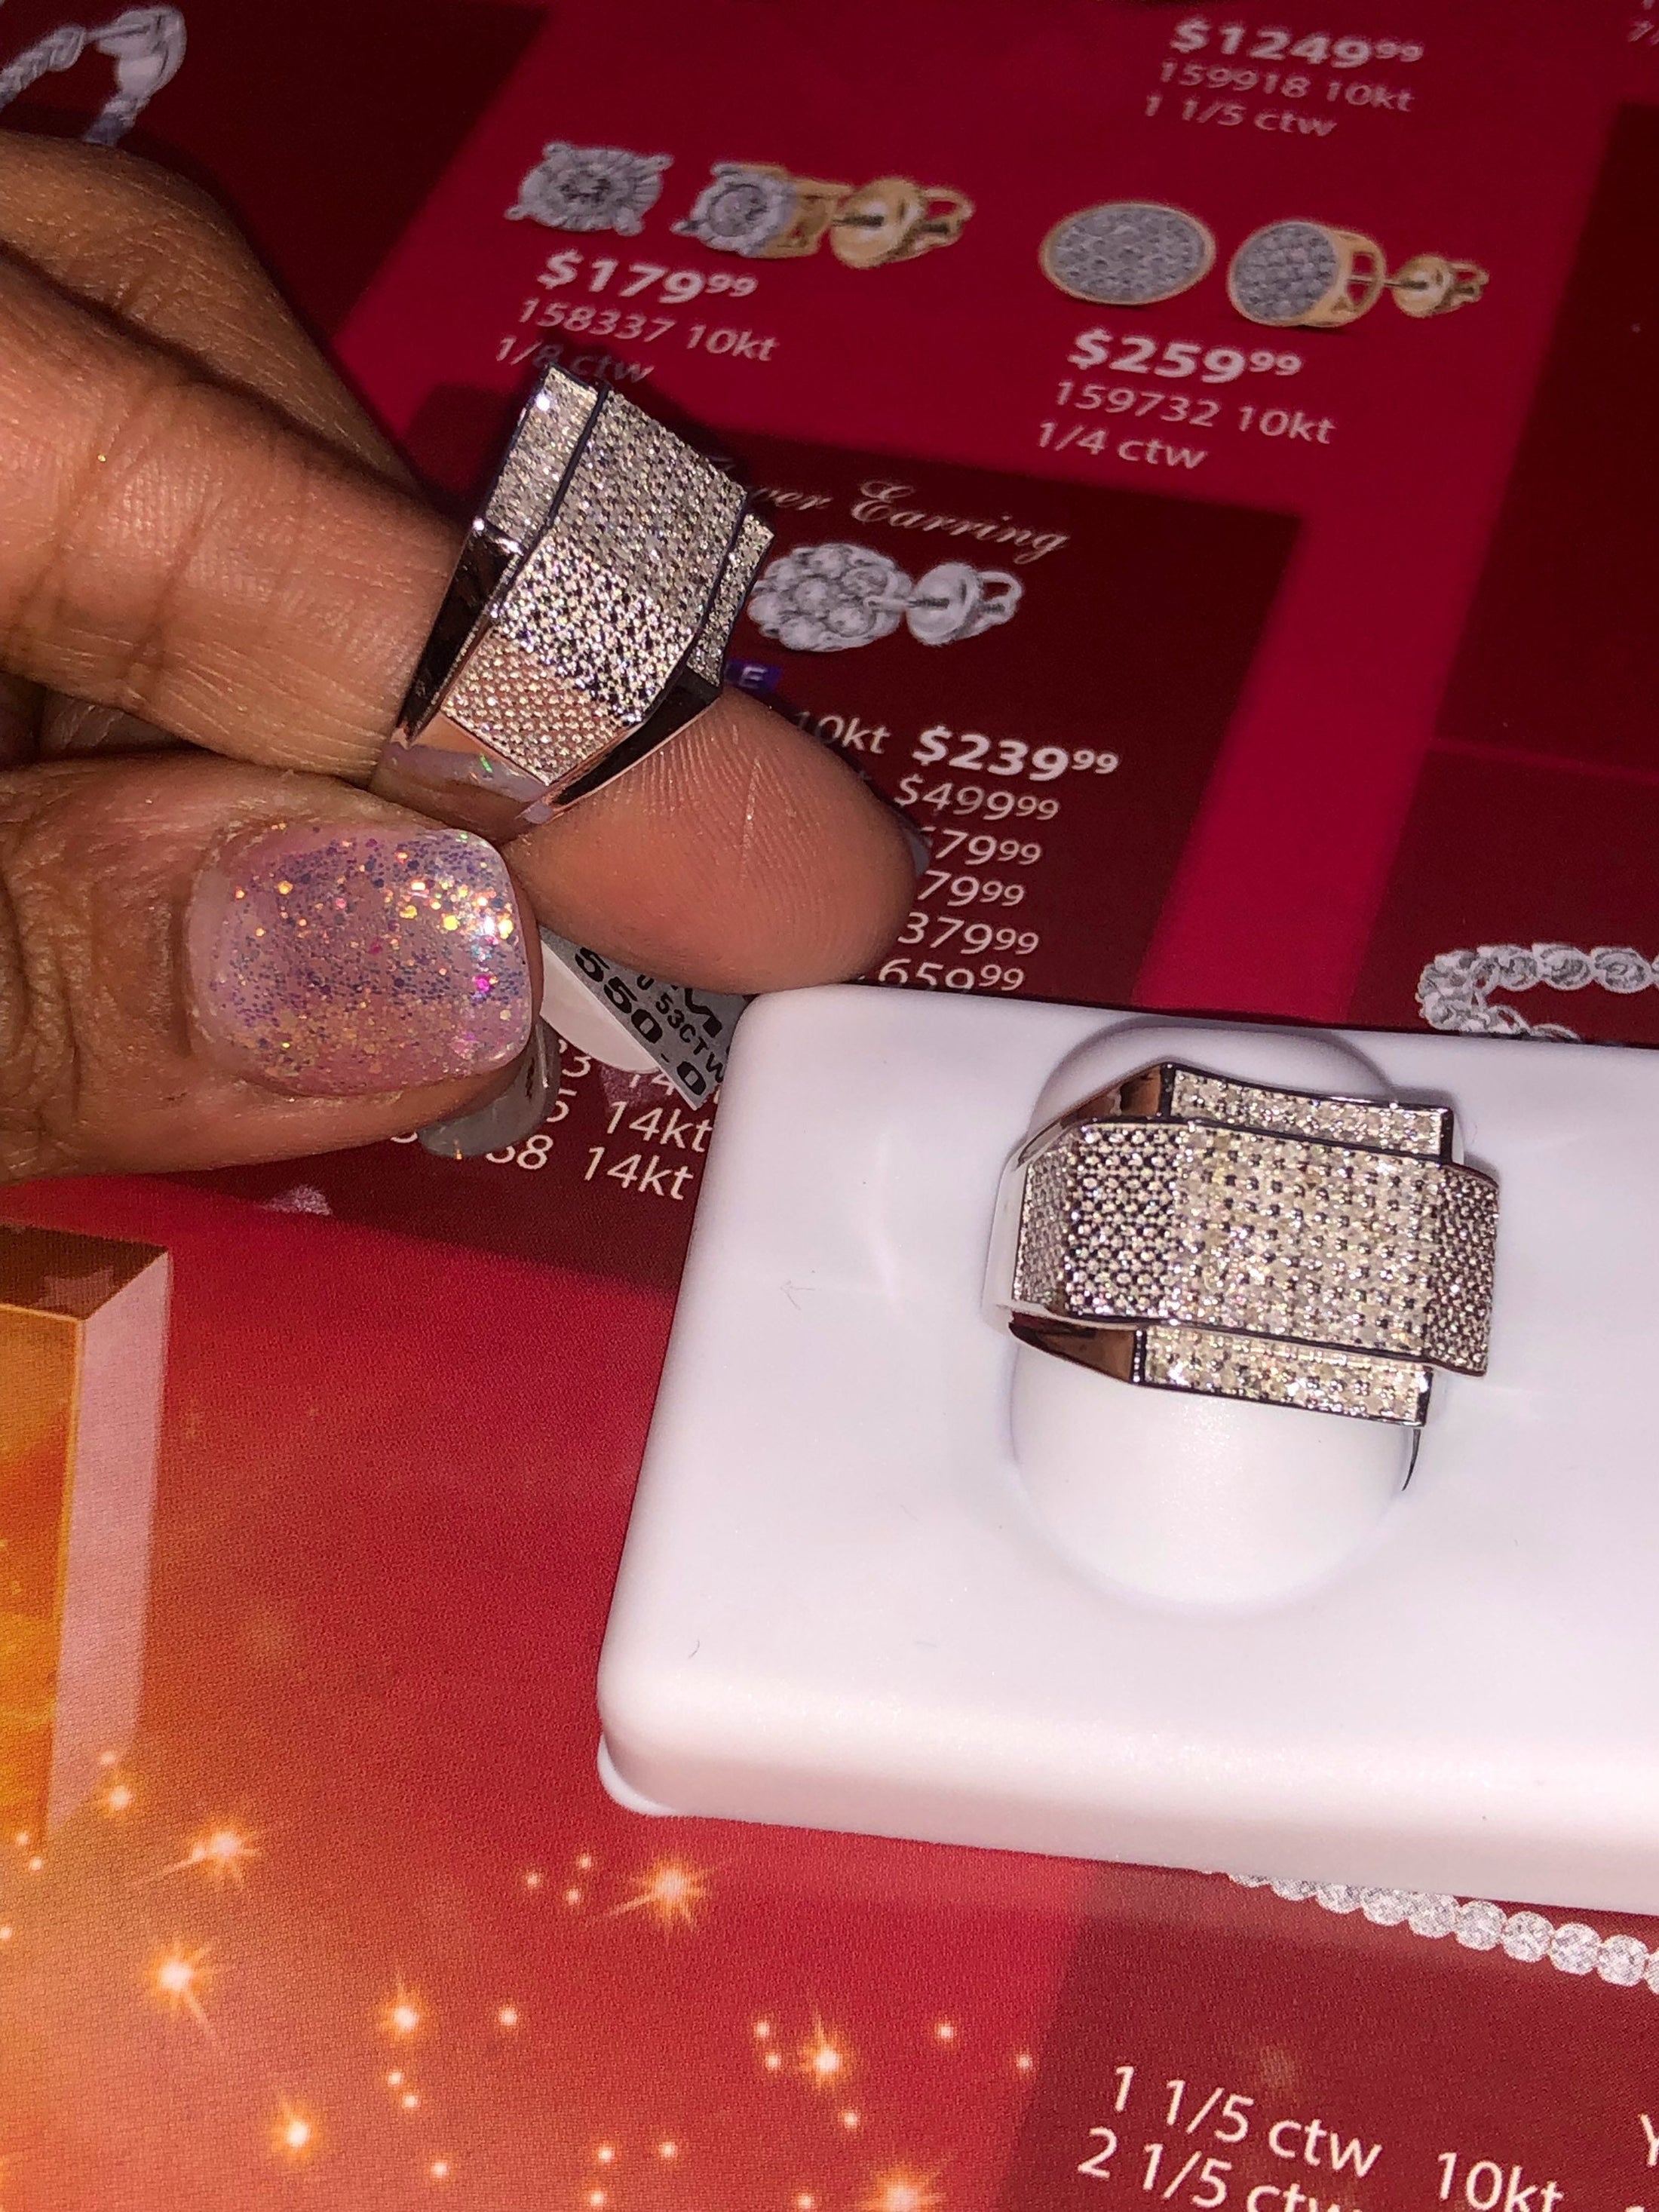 Real diamond Mens ring Custom made 100% natural genuine diamond ring w/ authenticity card & gift wrapping included! Best holiday sale